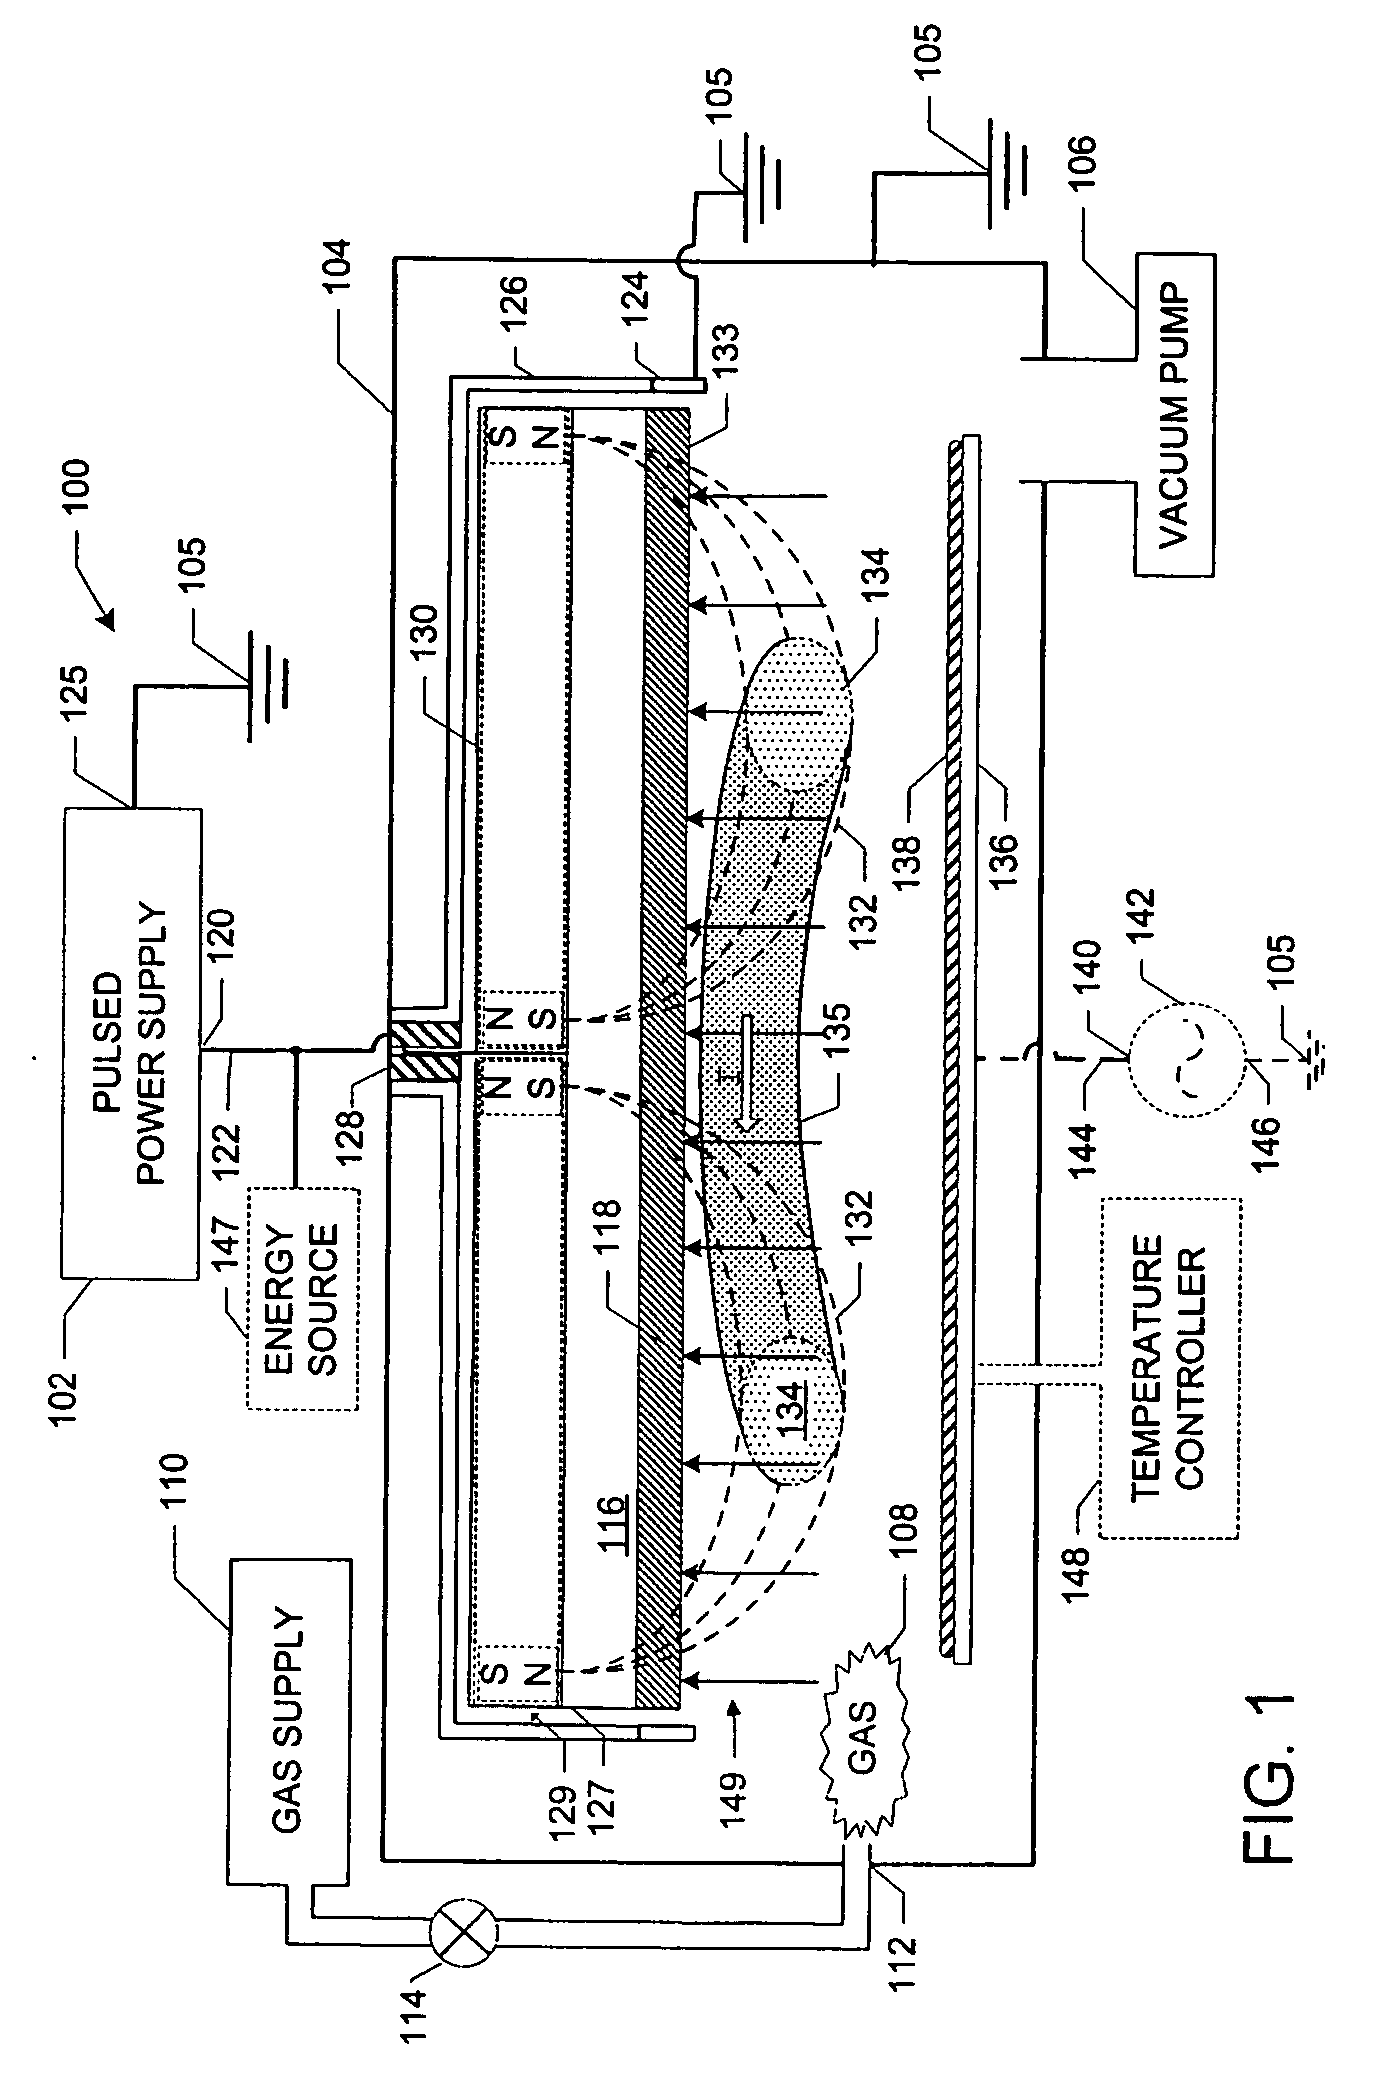 Methods and apparatus for generating strongly-ionized plasmas with ionizational instabilities